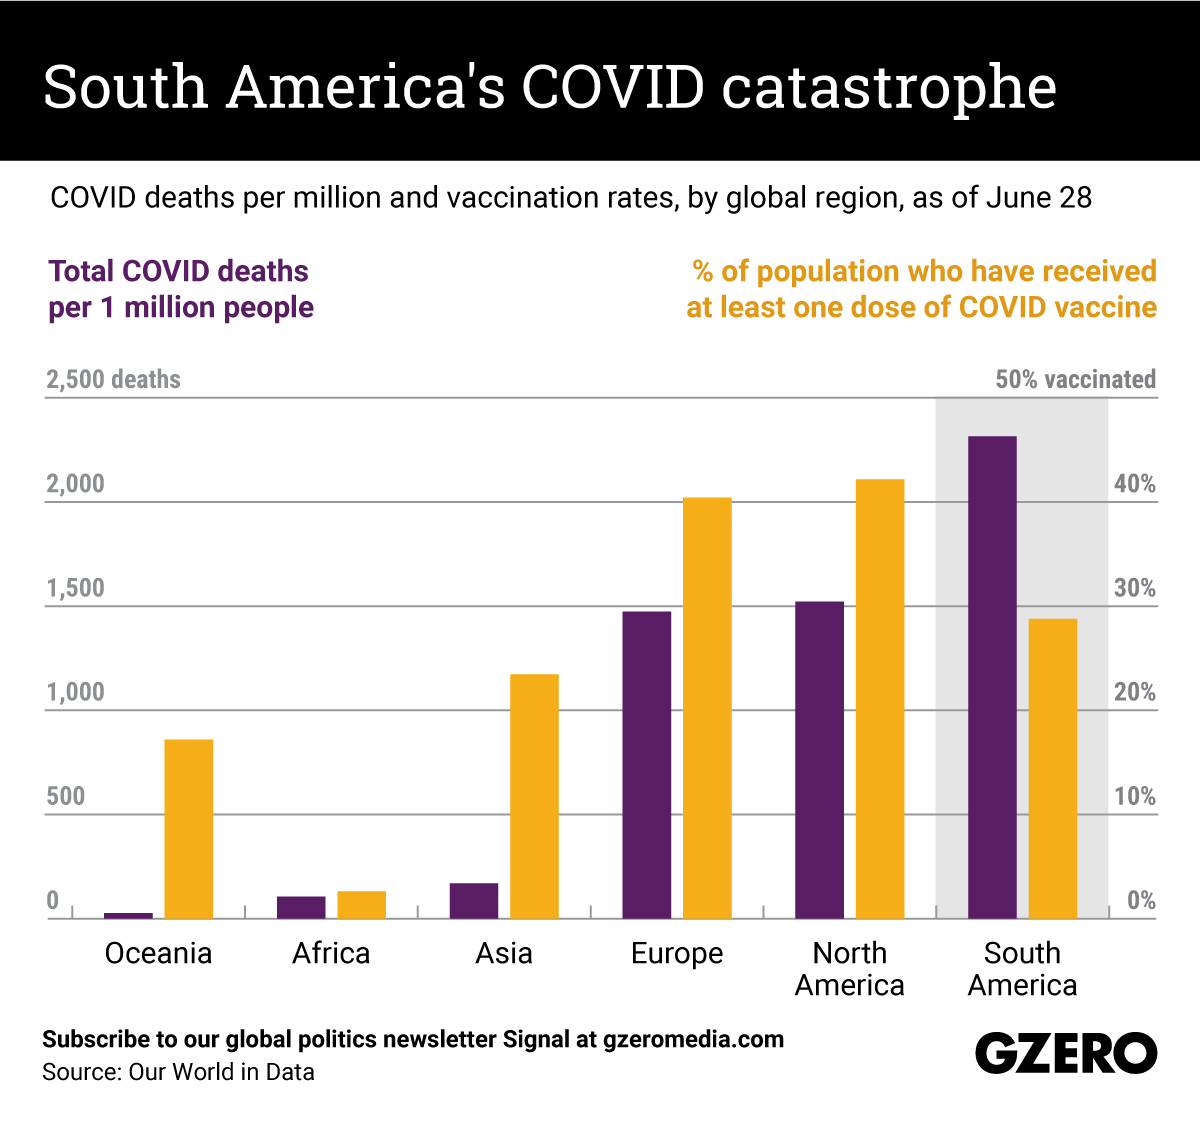 The Graphic Truth: South America's COVID catastrophe